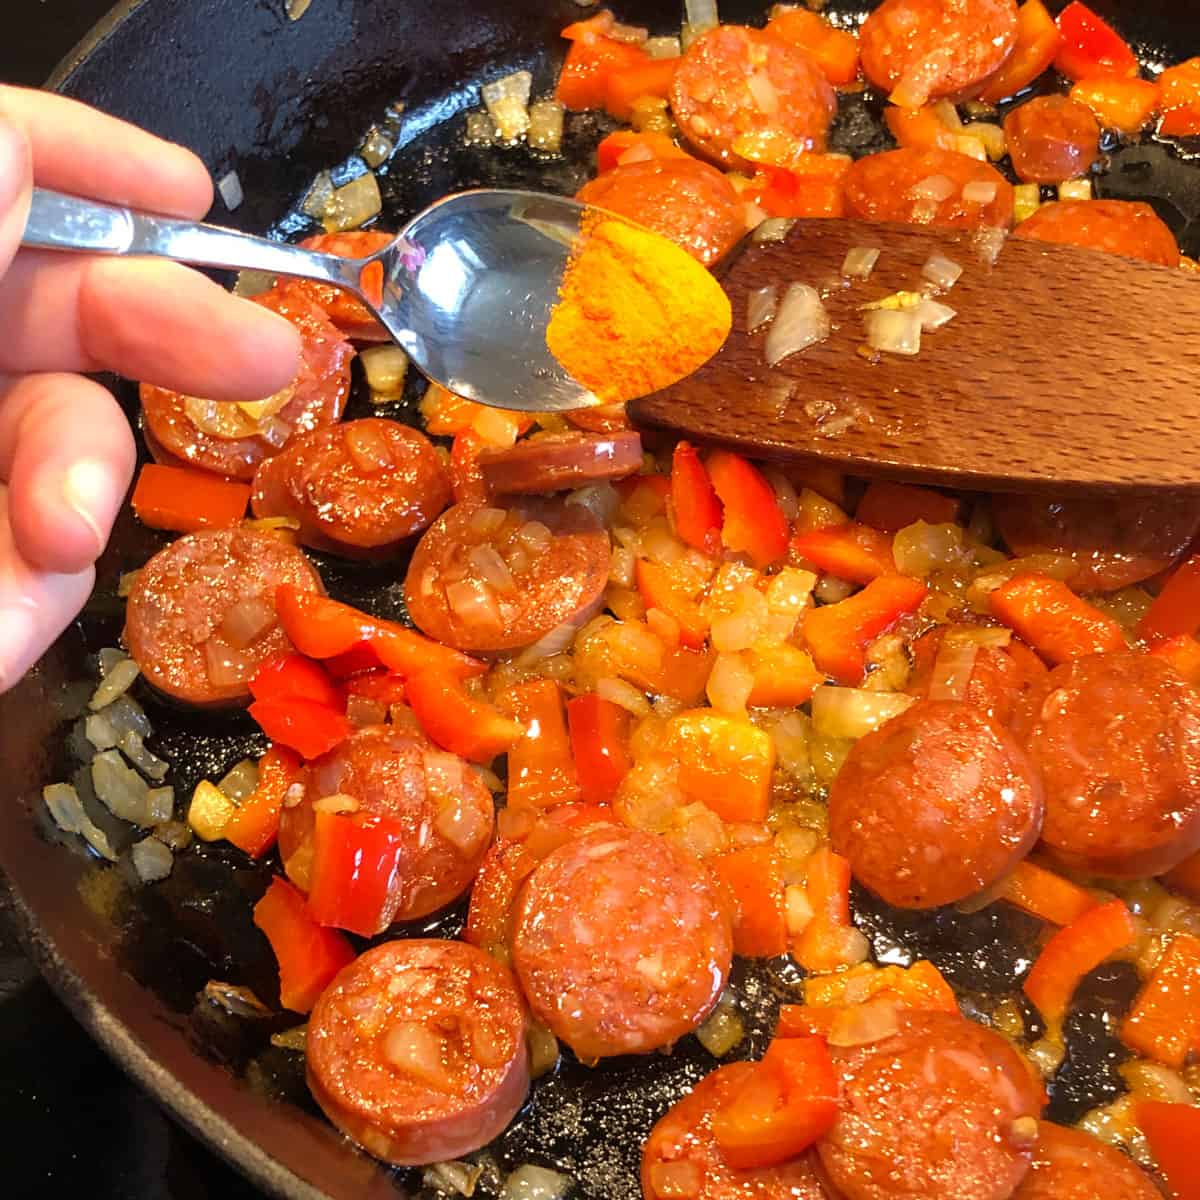 A picture of a recipe step - adding paella seasoning into the fried ingredients.